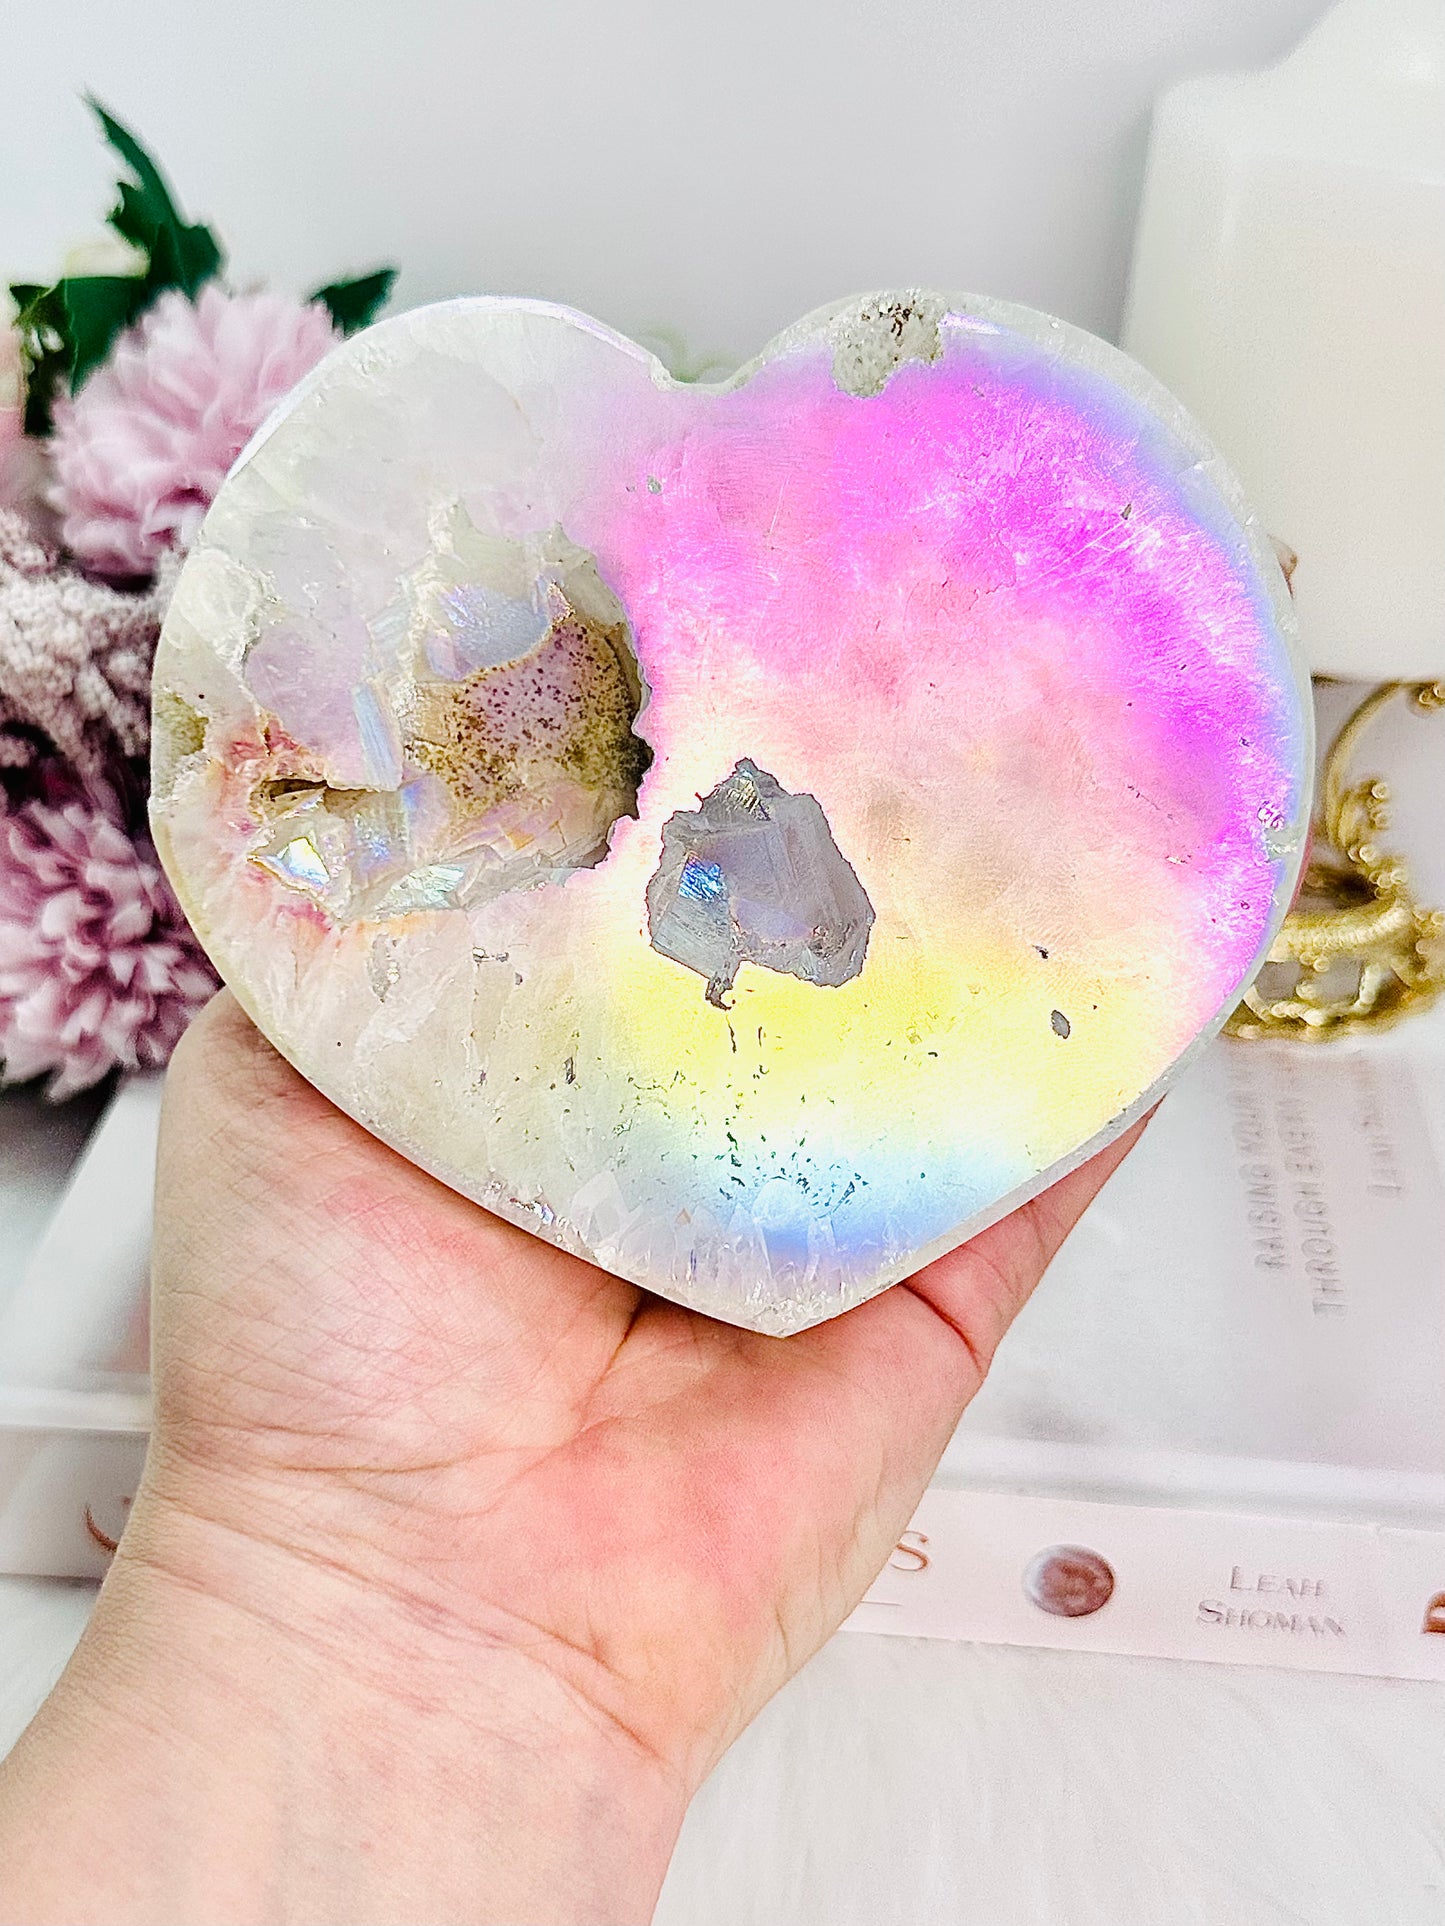 Divinely Spectacular Large 556gram Druzy Angel Aura Agate Chunky Heart From Brazil